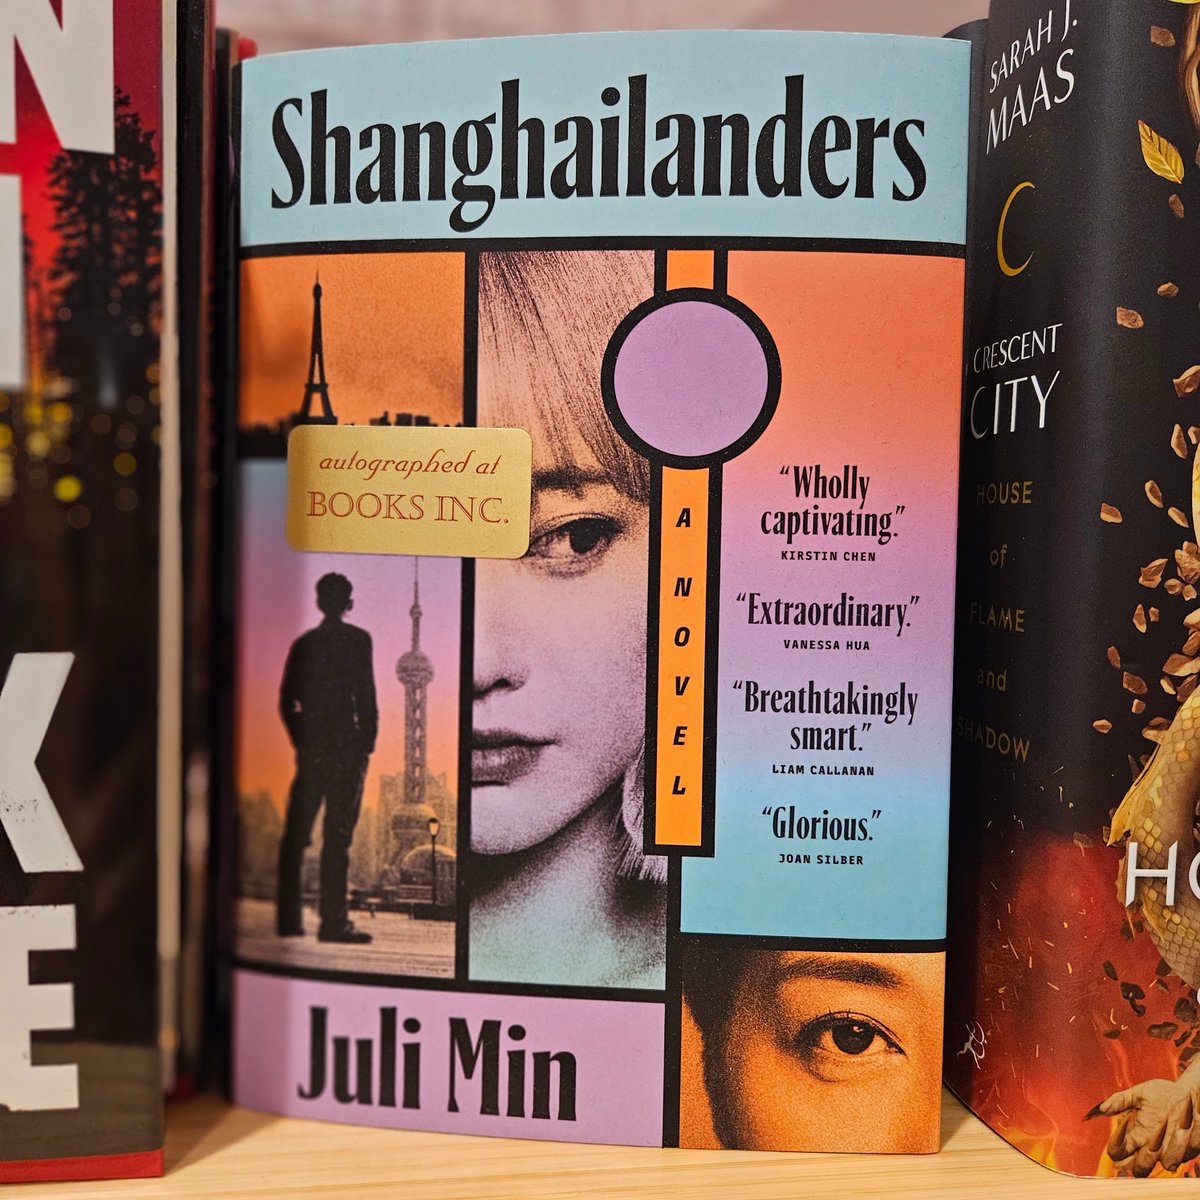 Need something fresh and new to read for #AANHPIHeritageMonth? Check out #Shanghailanders, signed by author #JuliMin at our T3 store. #NewBookTuesday